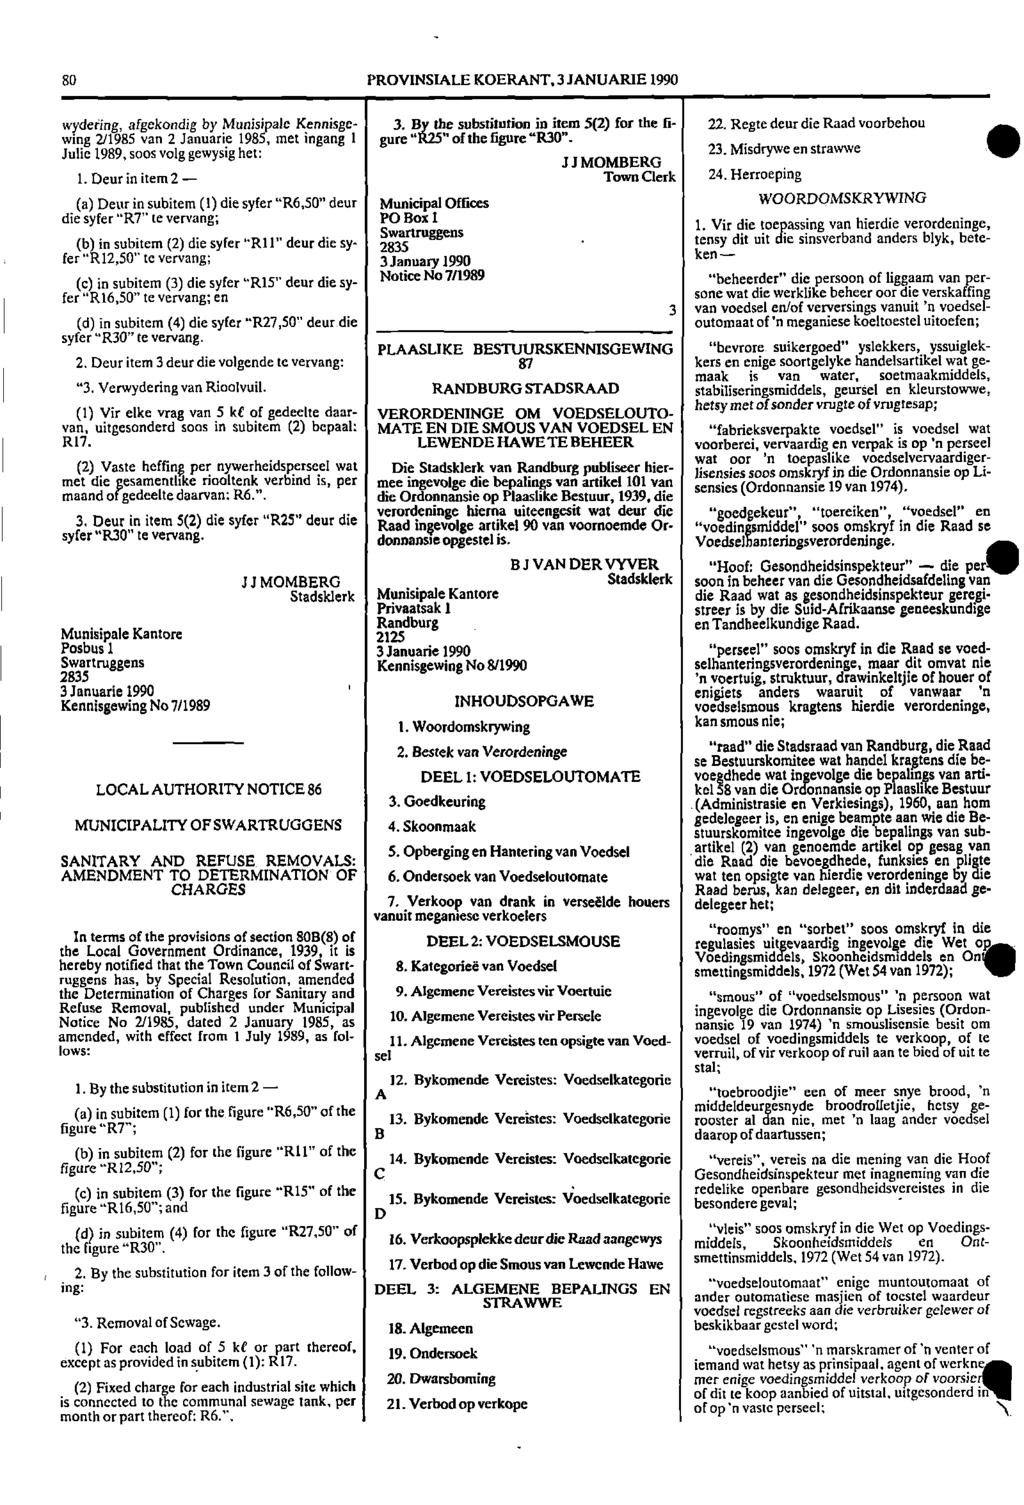 80 PROVNSALE KOERANT, 3 JANUARE 1990 wydering, afgekondig by Munisipale Kennisge 3. By the substitution in item 5(2) for the fi 22.